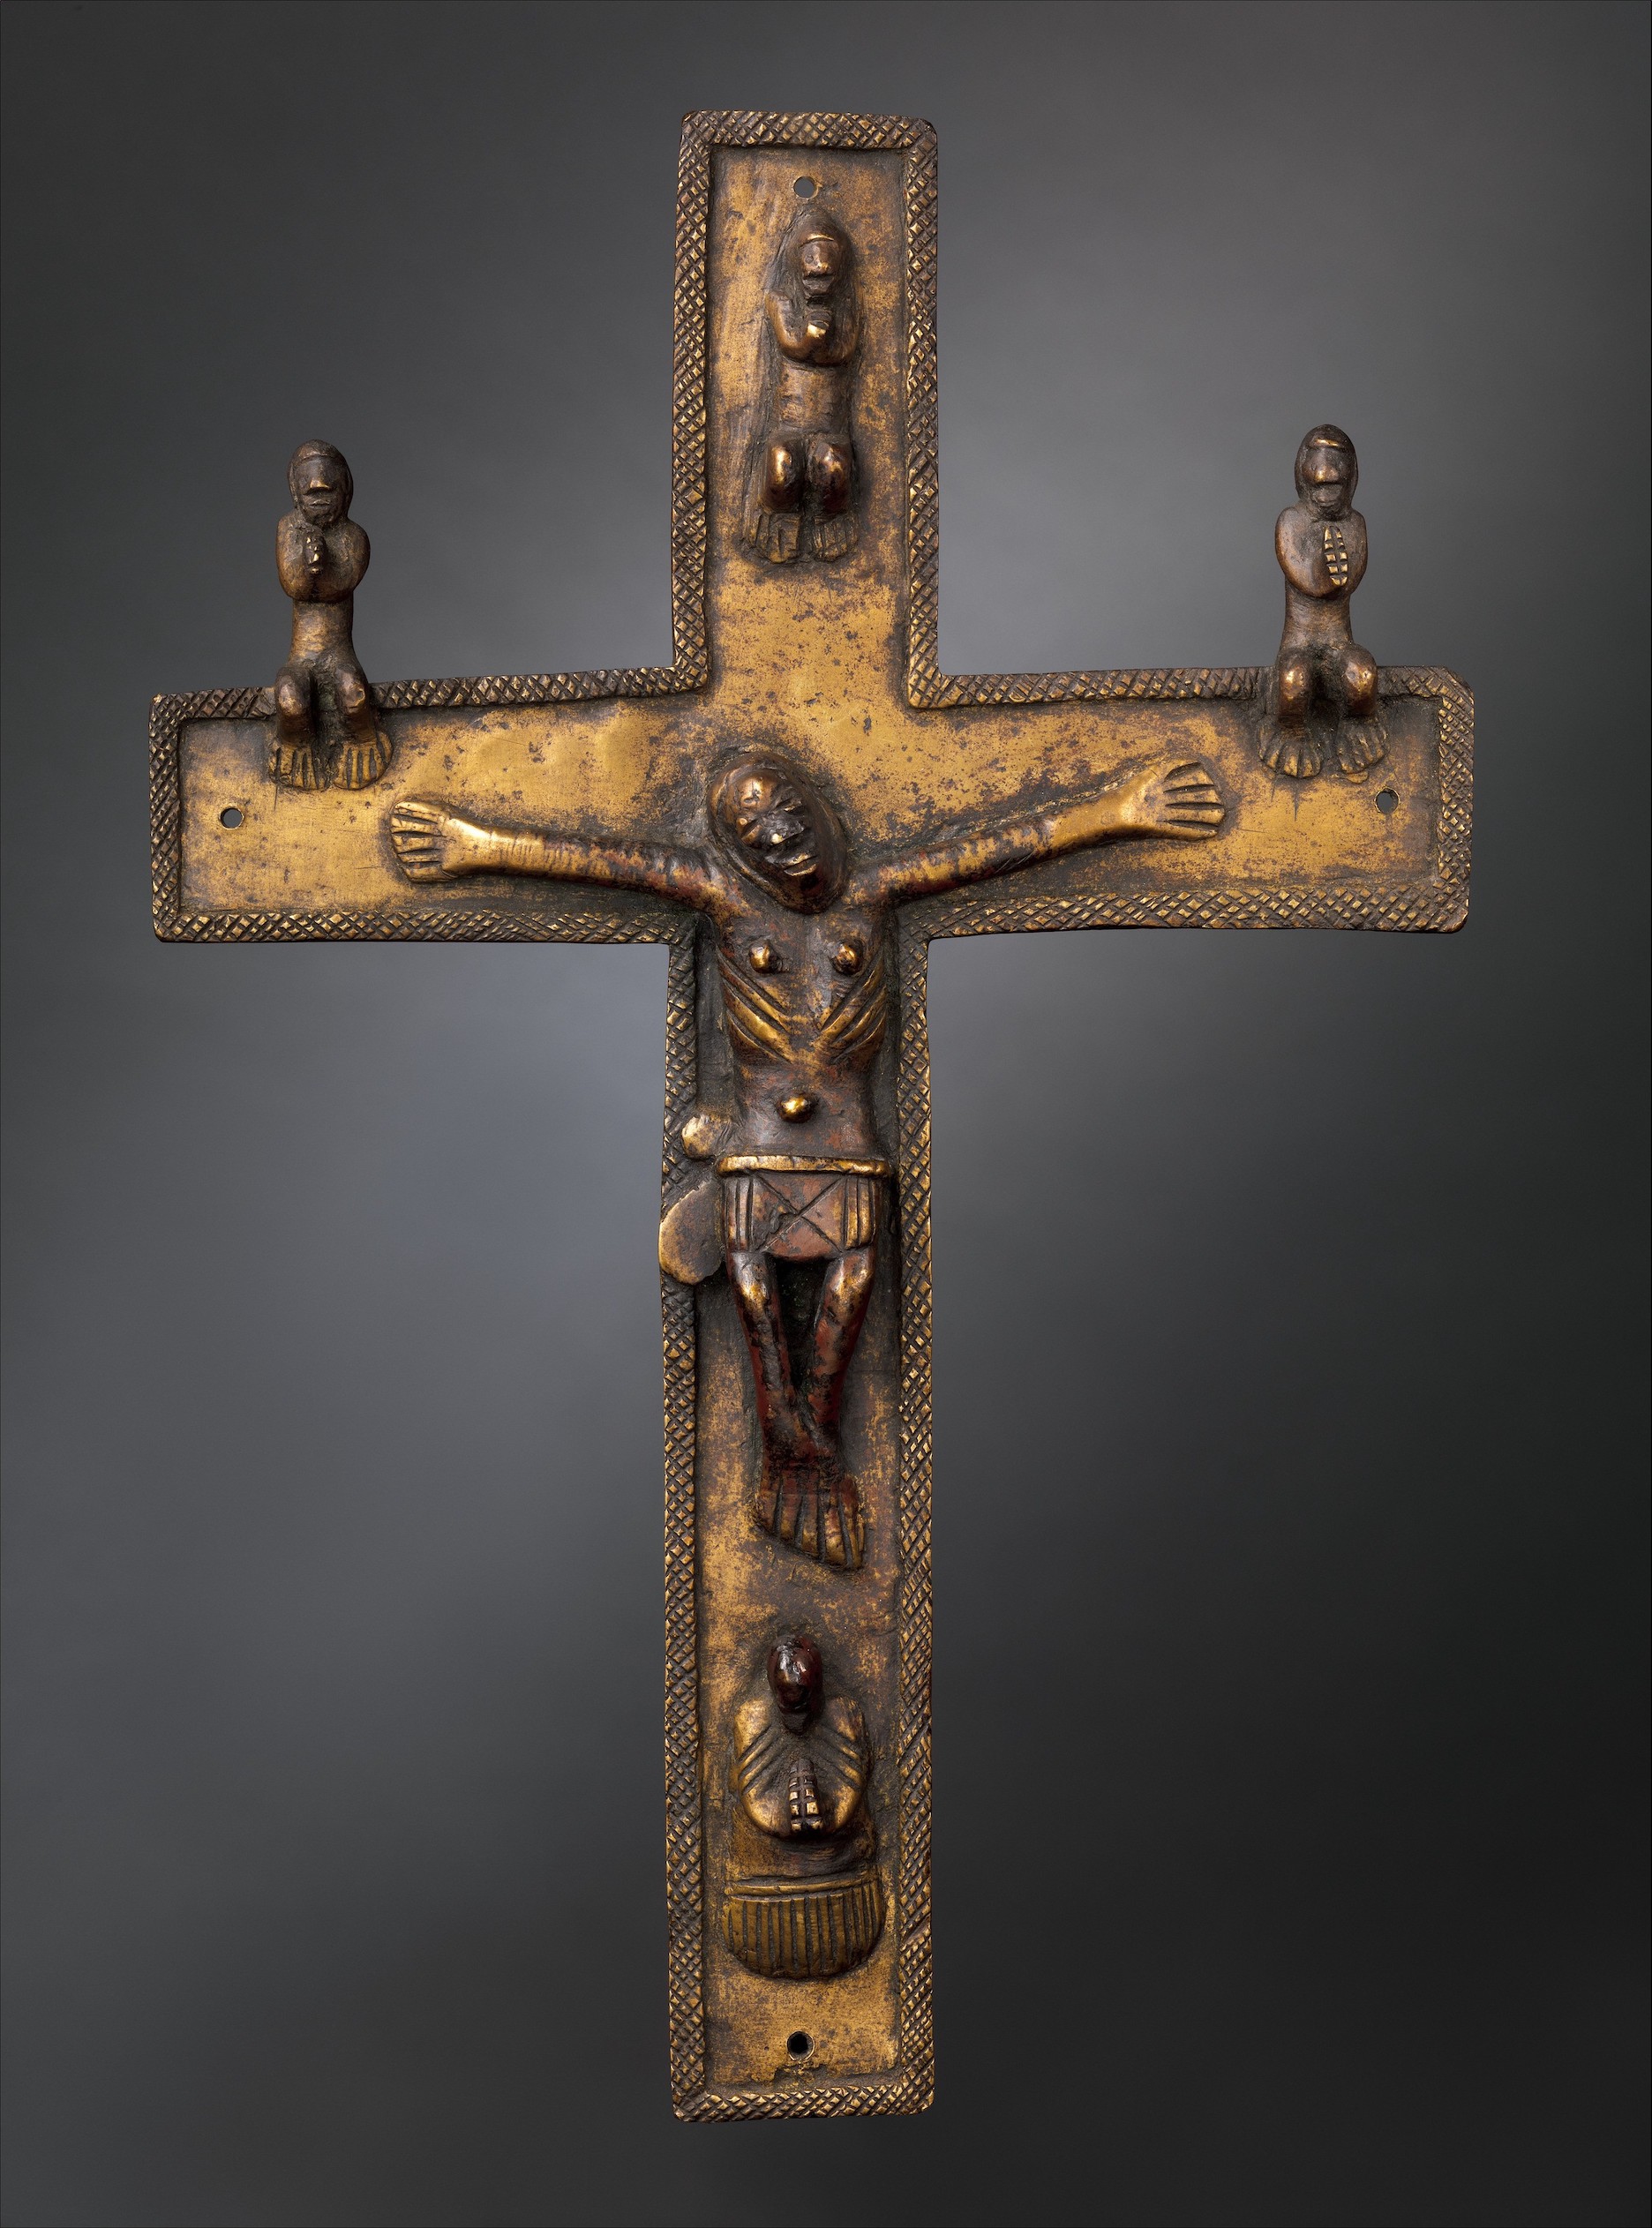 Crucifix, 16th–17th century (Kong Peoples, Democratic Republic of the Congo; Angola; Republic of the Congo), solid cast brass, 27.3 cm high (The Metropolitan Museum of Art, New York)